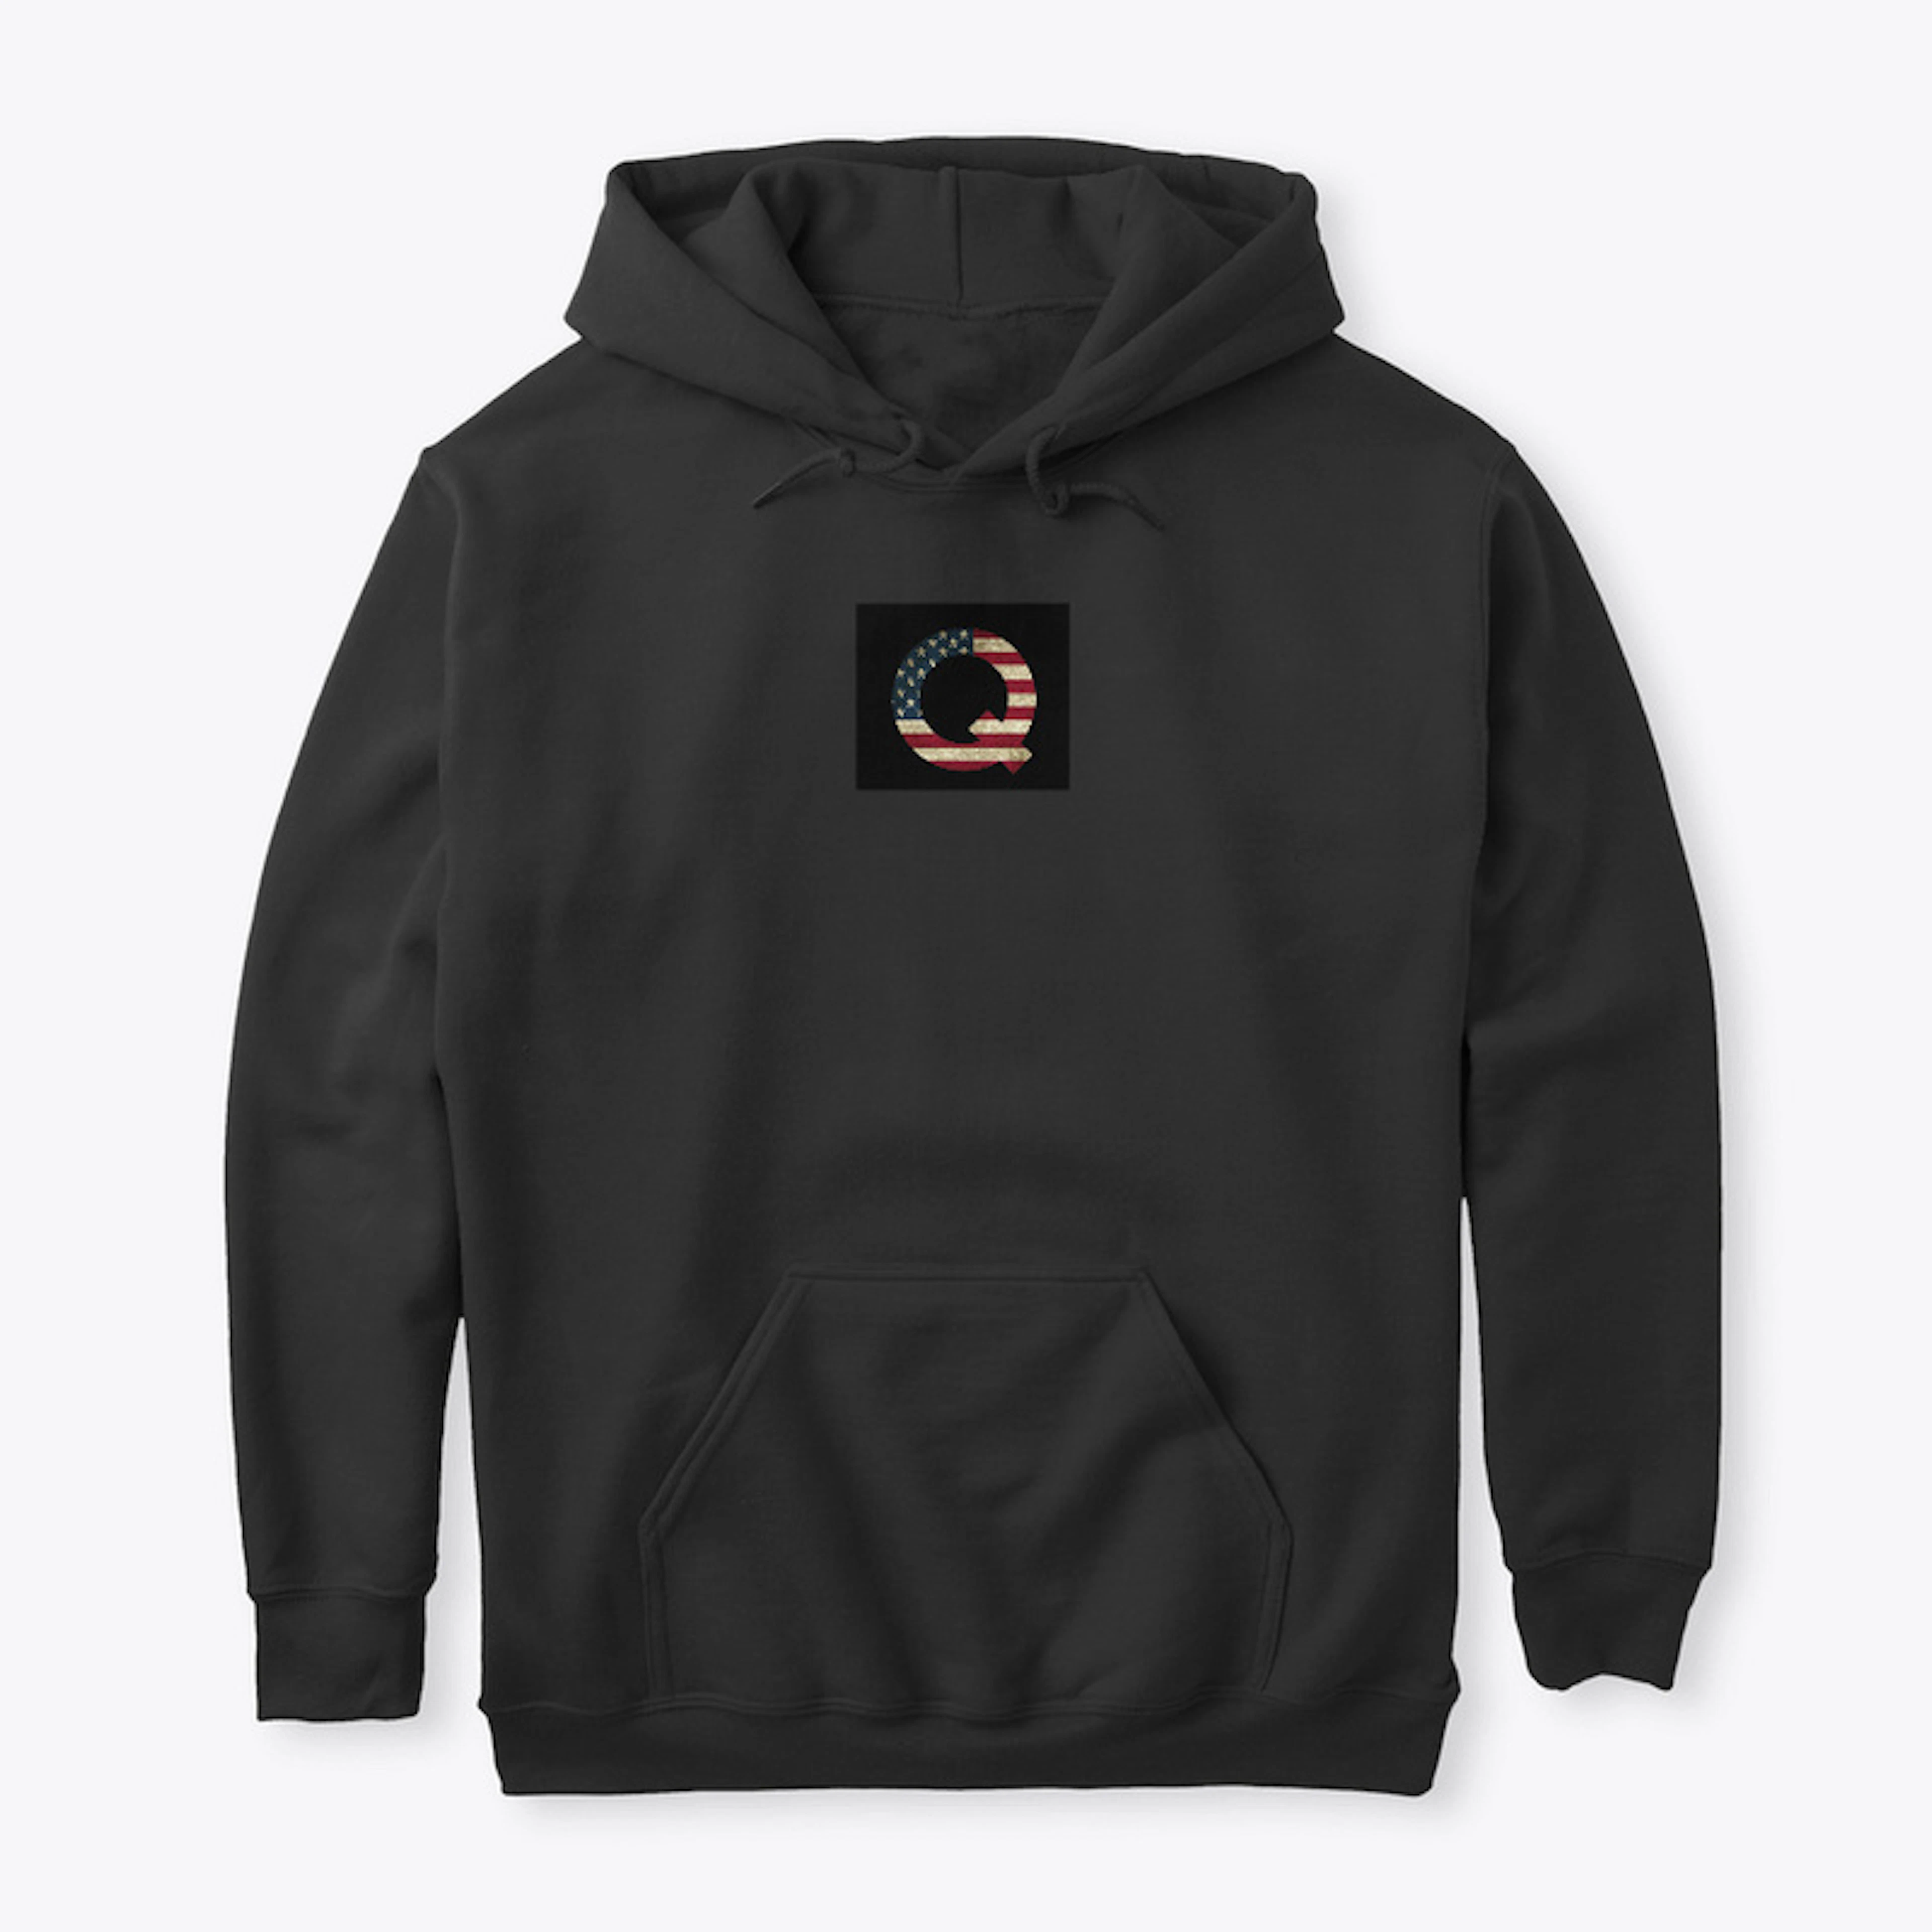 The QUESTLIFE LOGO collection